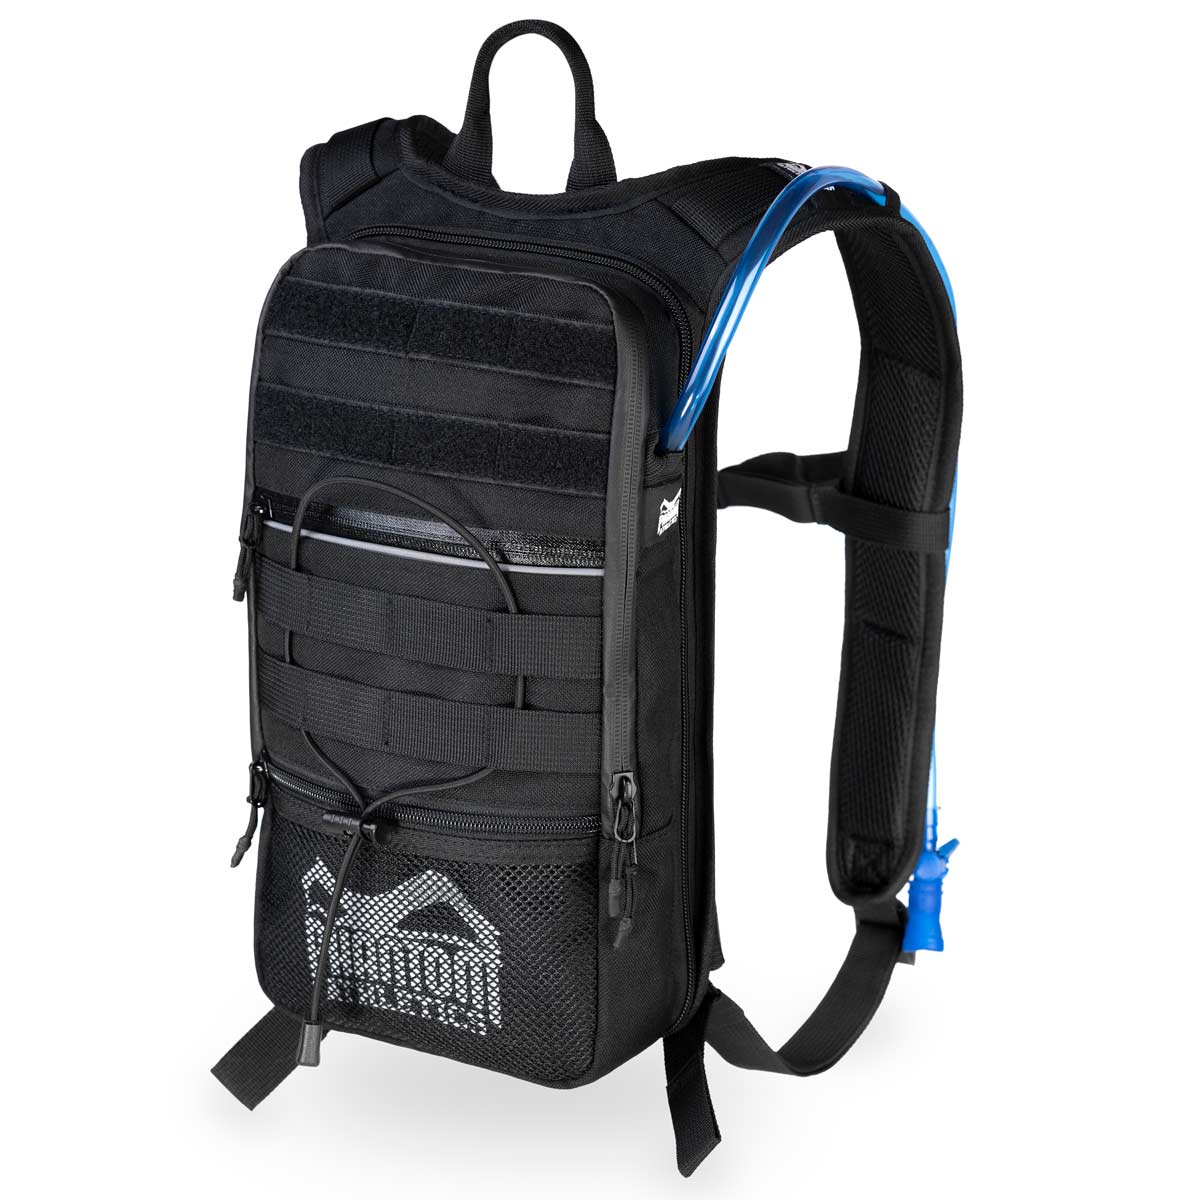 Hydro backpack (with hydration system)